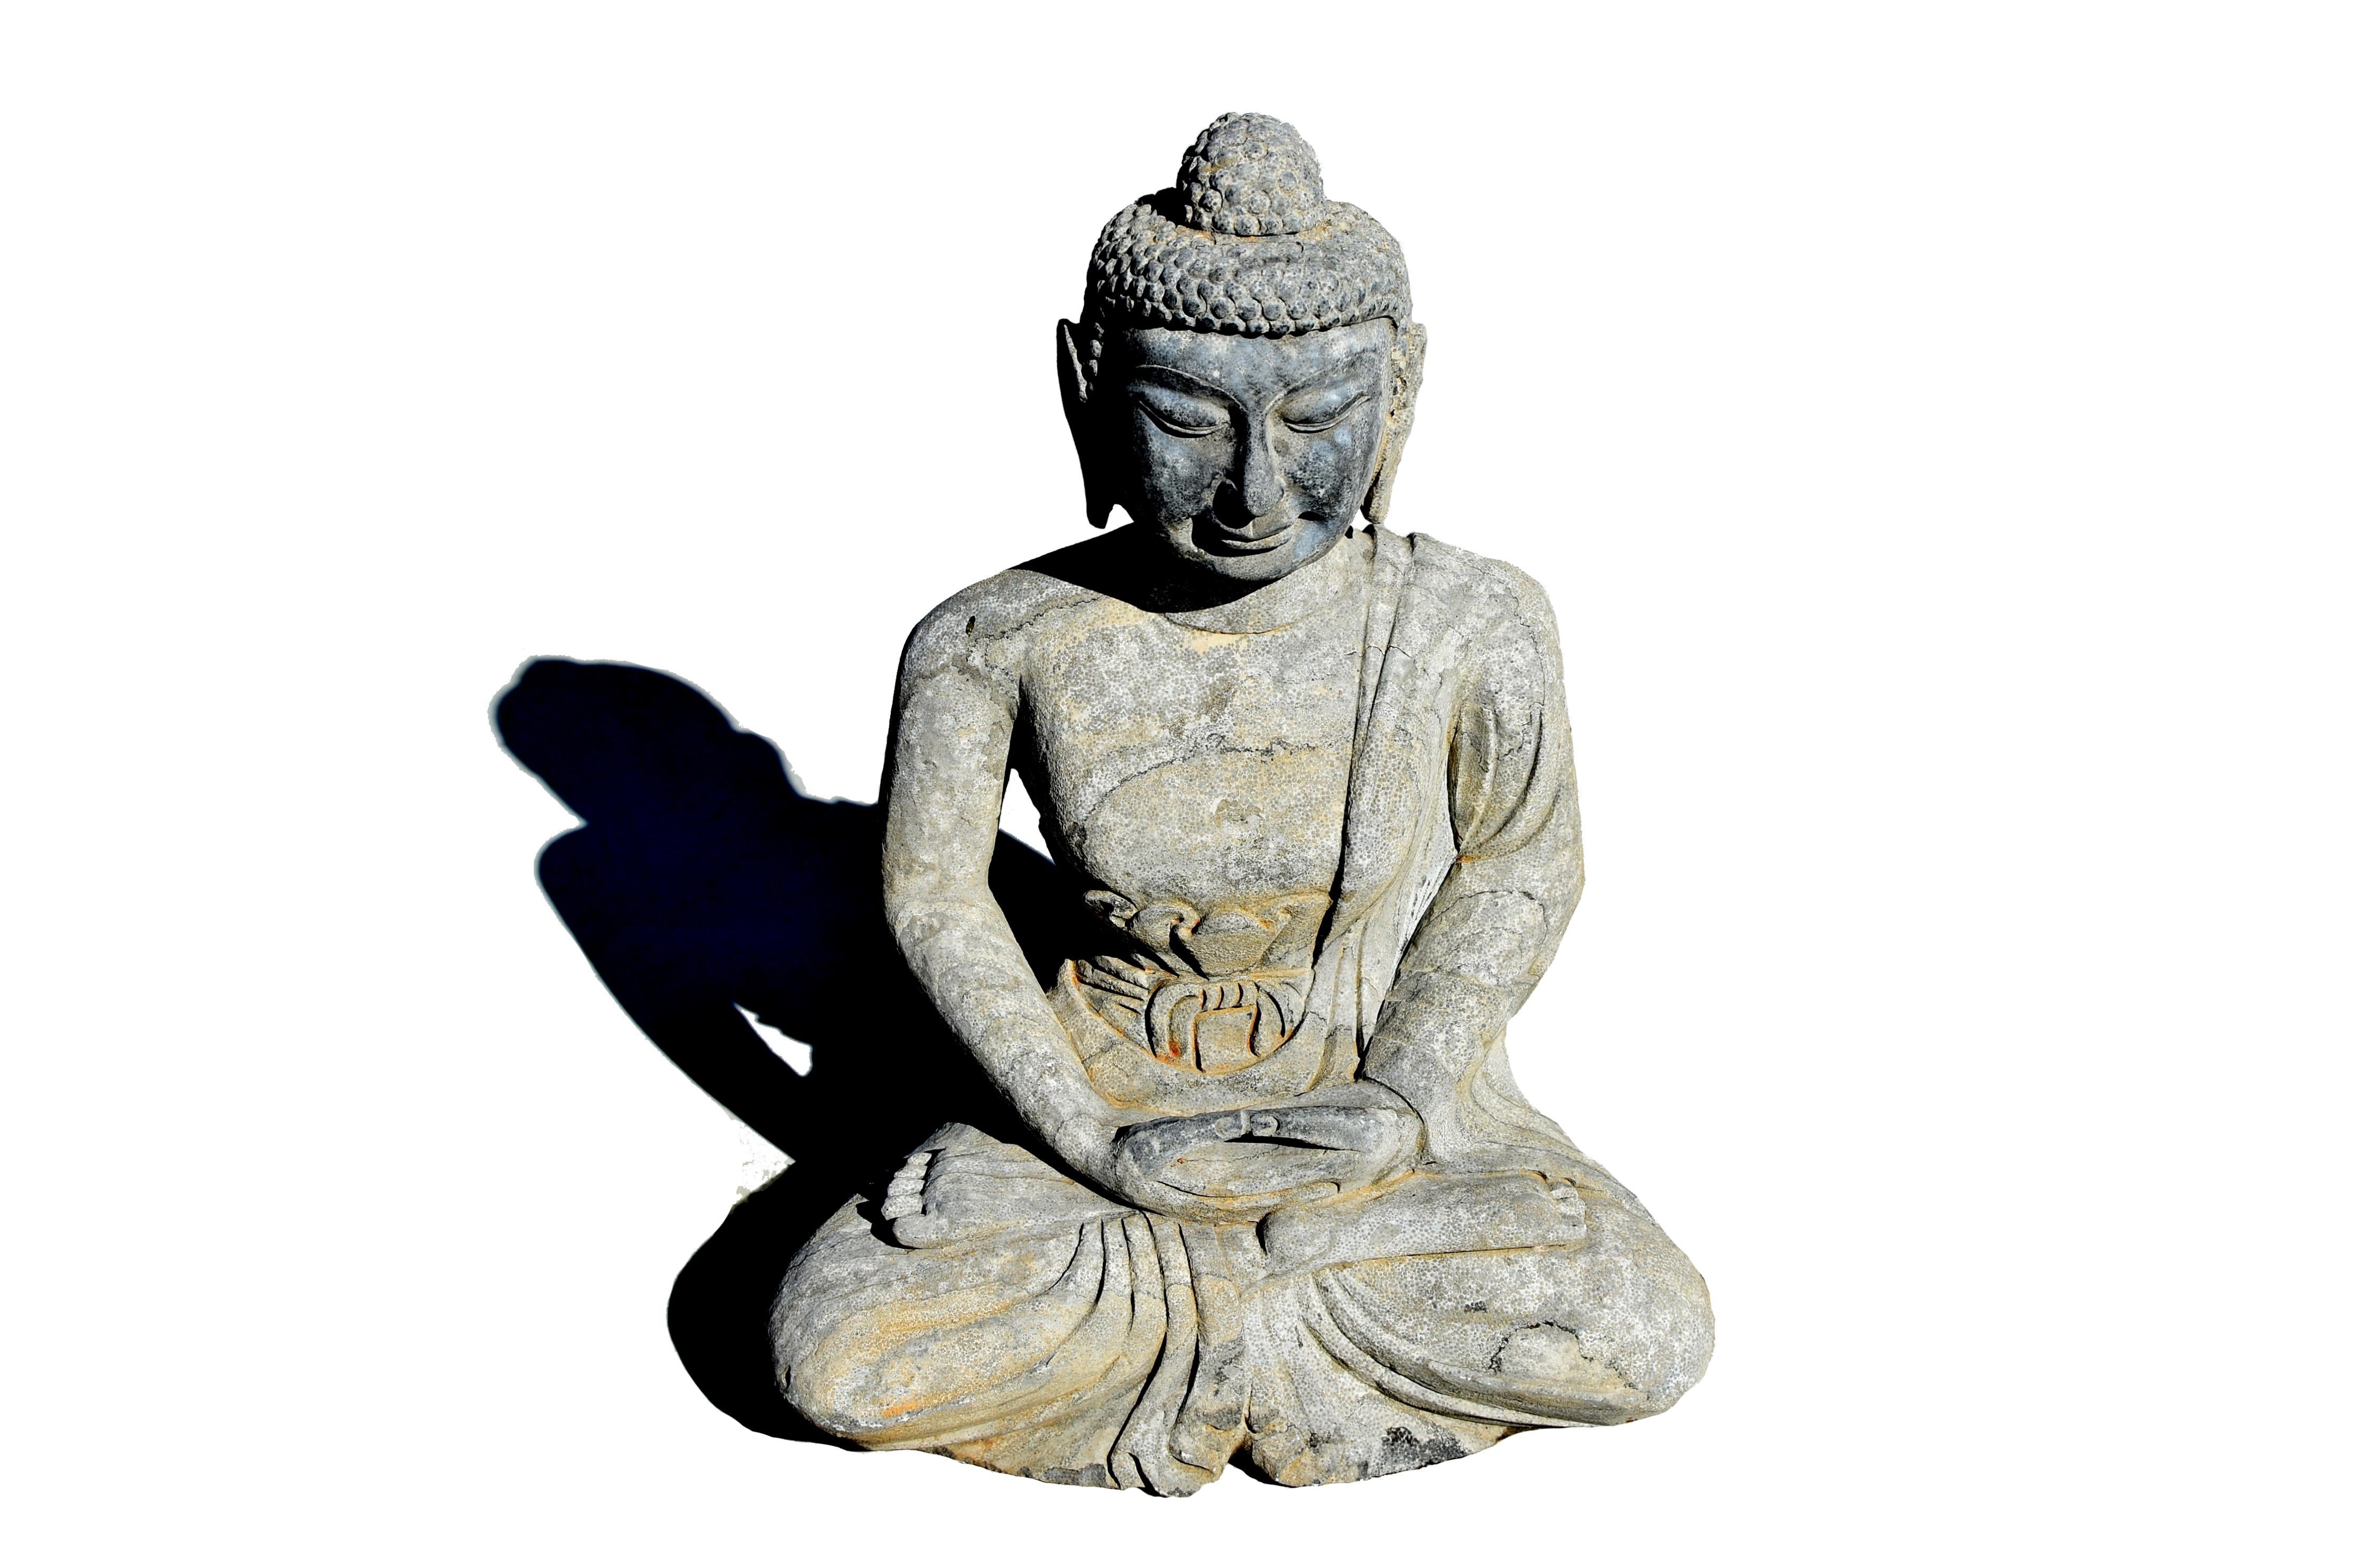 A large hand carved solid stone Buddha statue seated in dhyana position. The broad face with high arched eyebrows and downcast eyes casting a serene aura, framed by long-lobed ears and beneath a pronounced hairline and surmounted by an ushnisha.